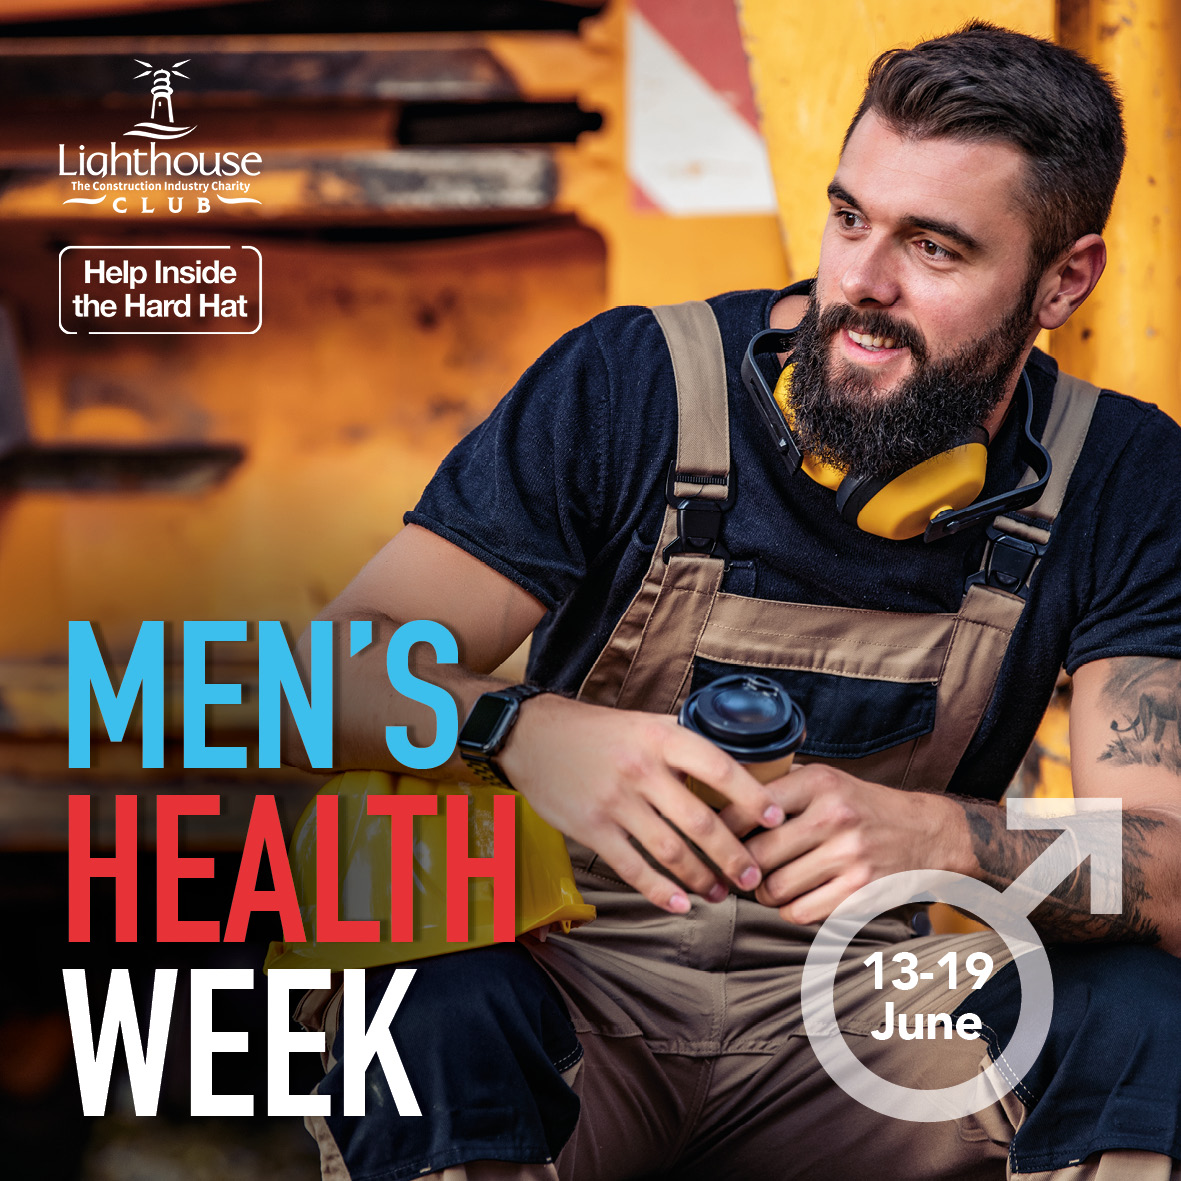 Construction charity shines a light on Men’s Health Week